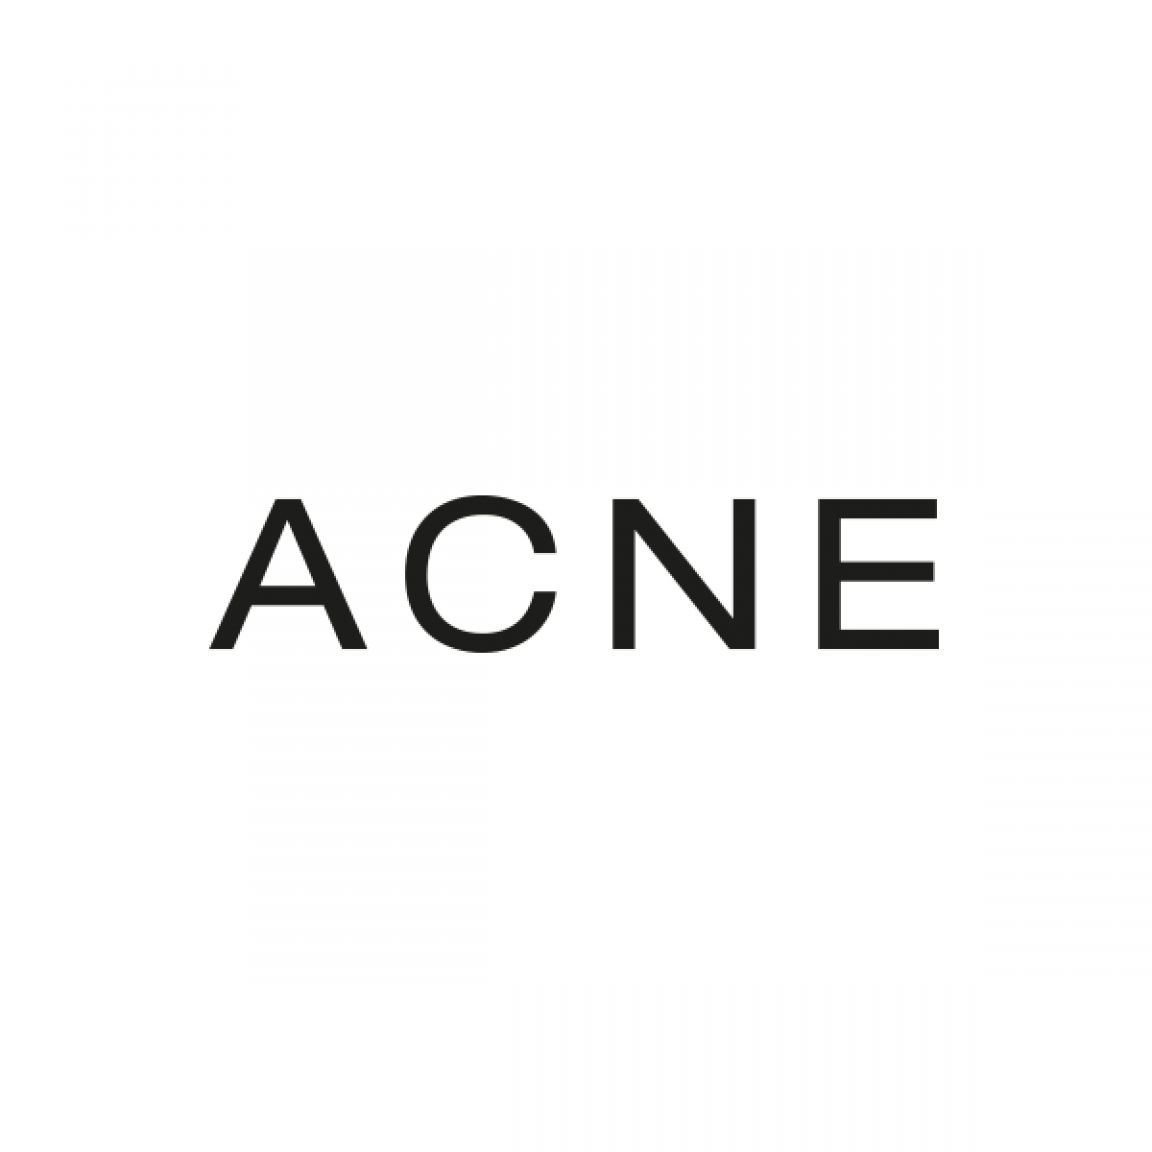 ACNE | Advertising Producers Association | Advertising Producers ...